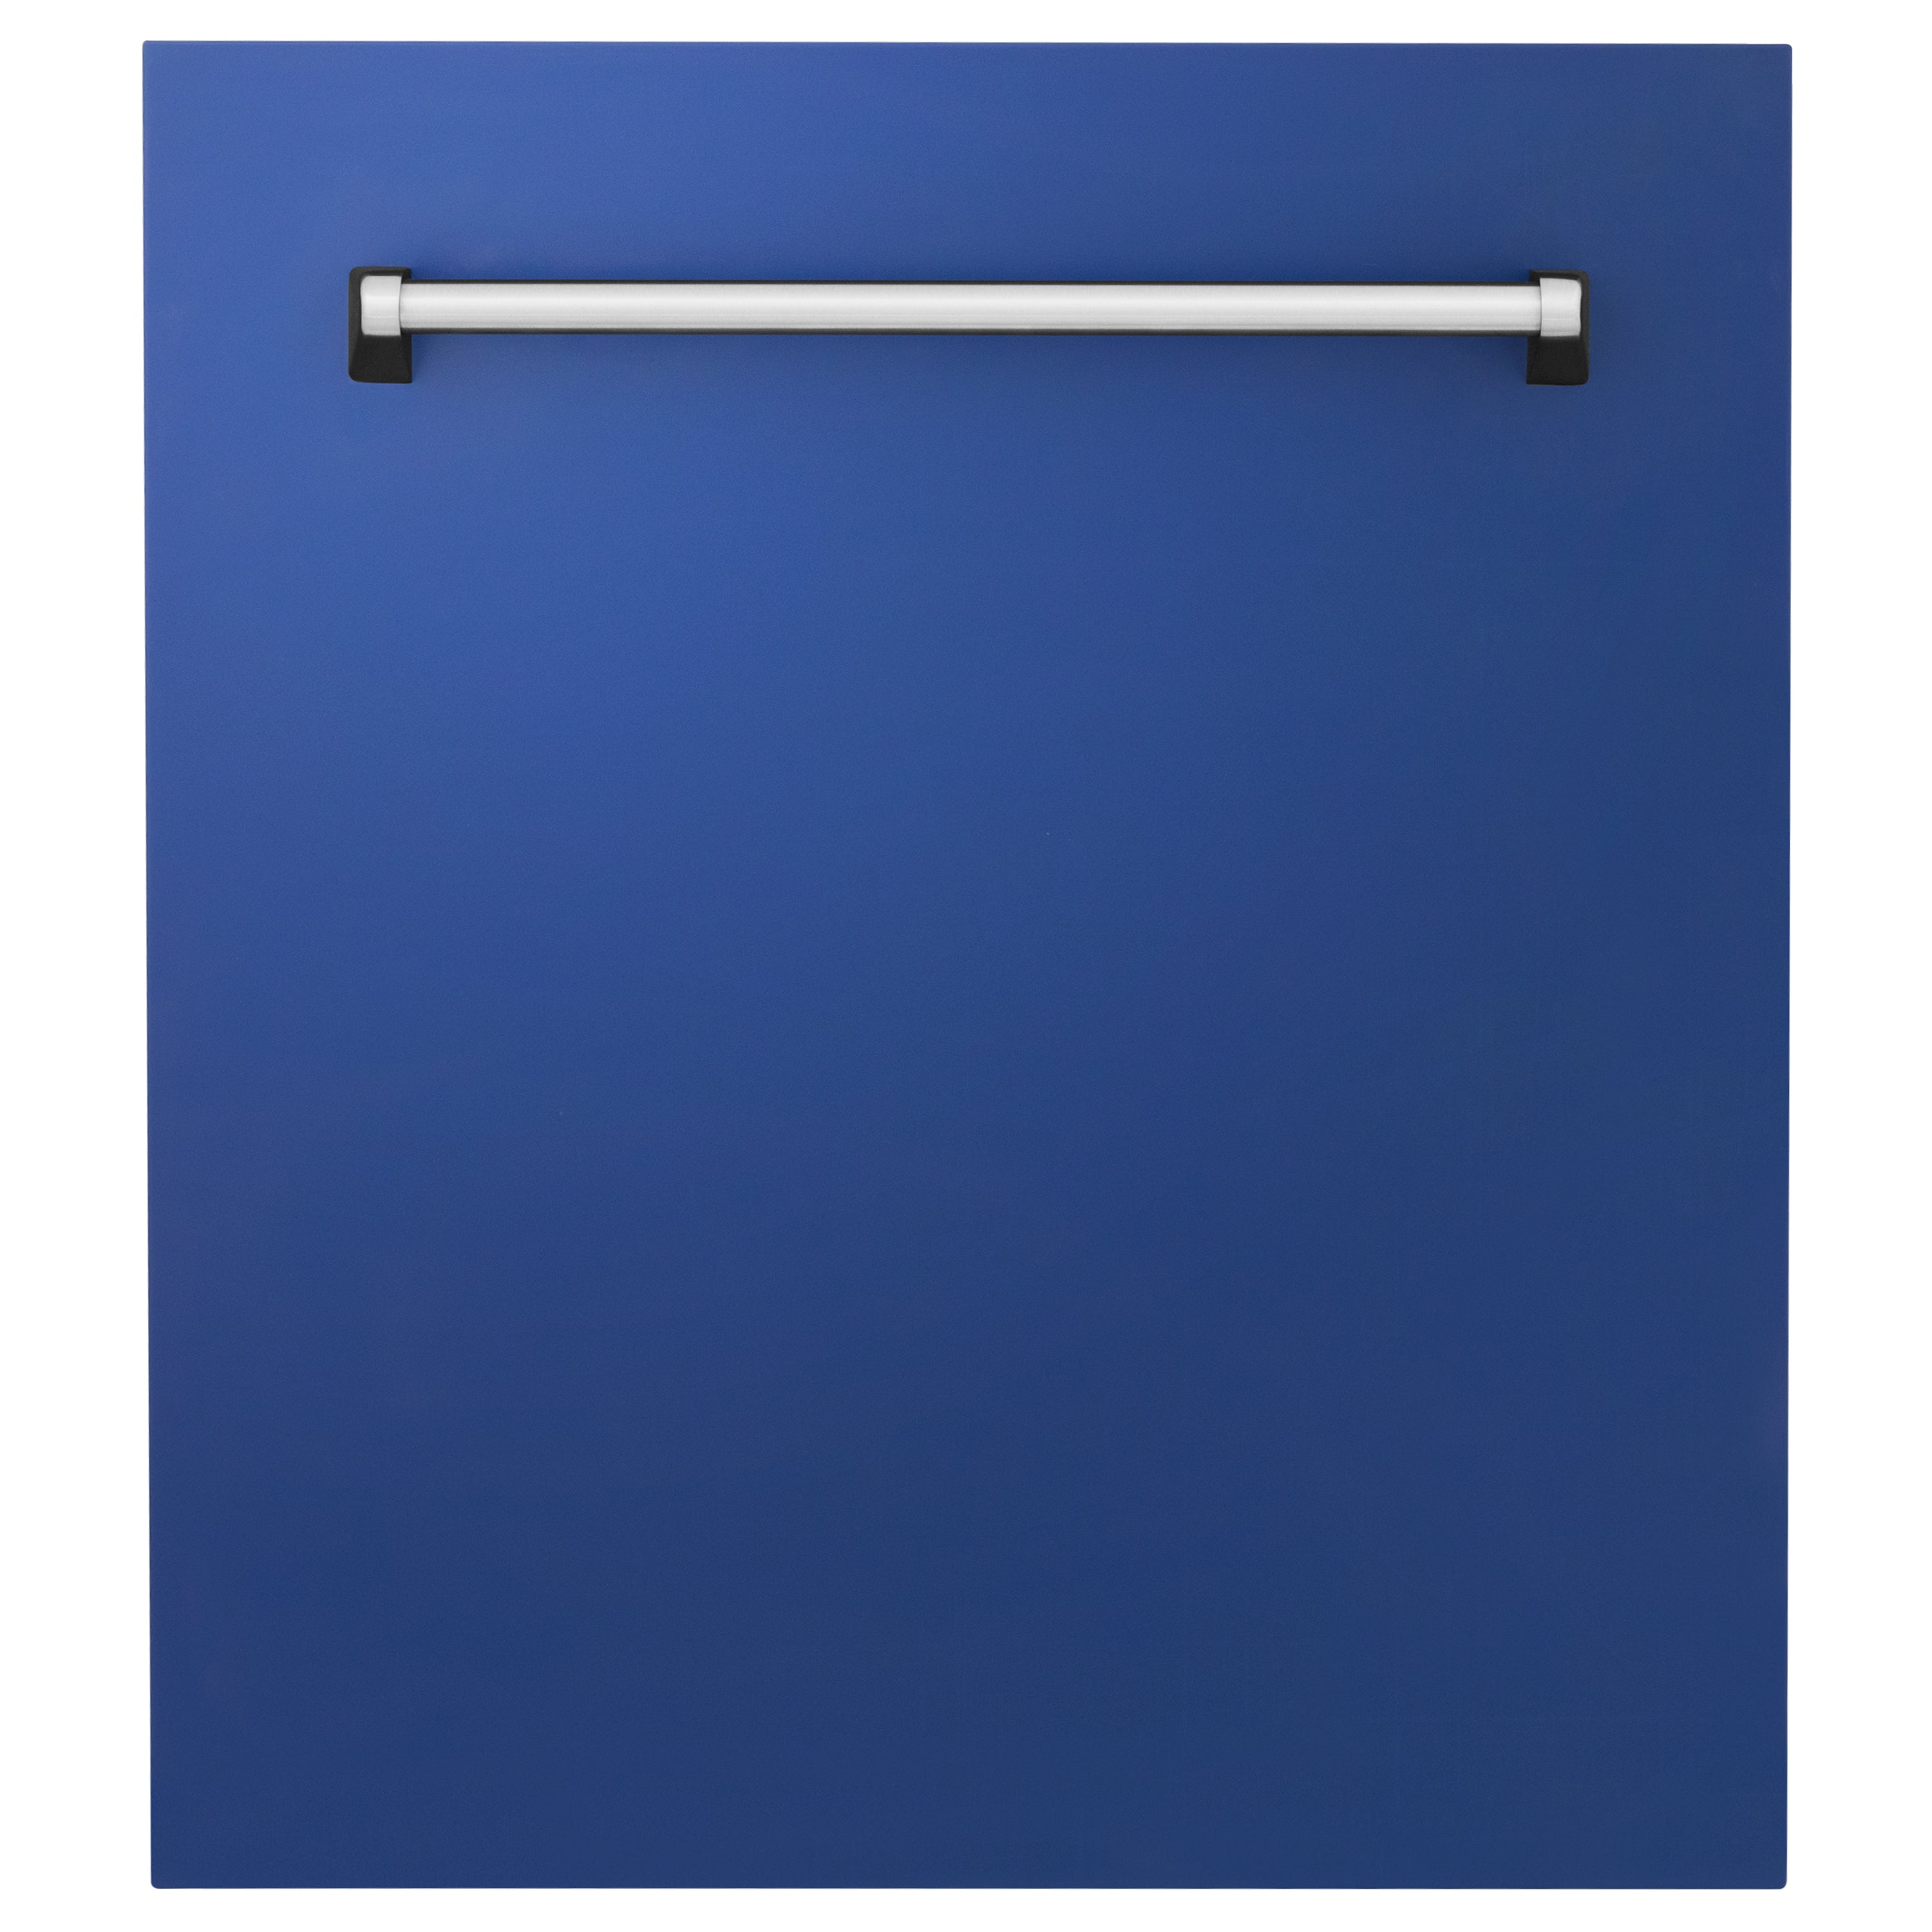 ZLINE 24" Tallac Series 3rd Rack Tall Tub Dishwasher in Blue Matte with Stainless Steel Tub, 51dBa (DWV-BM-24)